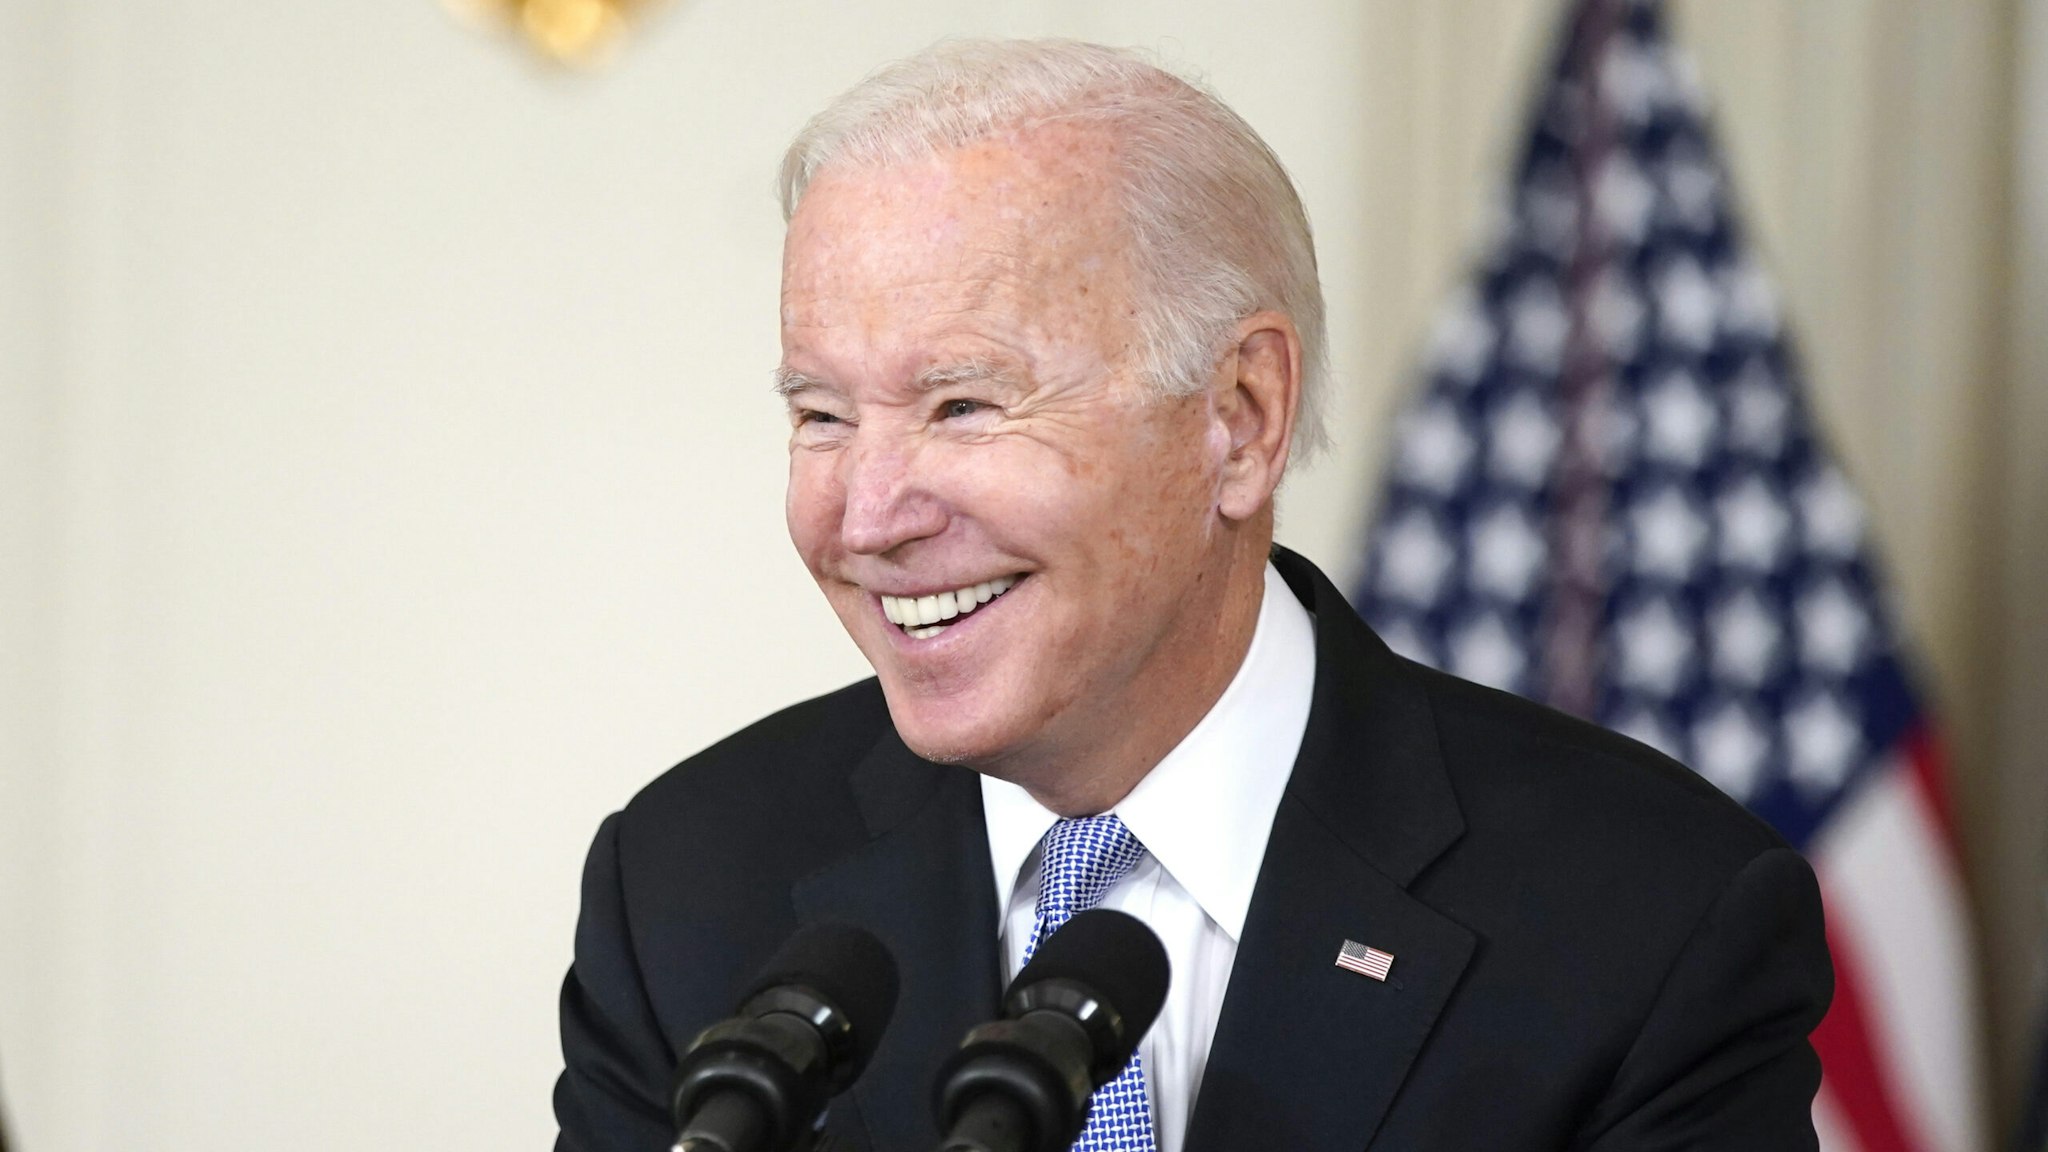 U.S. President Joe Biden smiles while speaking on the passage of the Bipartisan Infrastructure Deal as U.S. Vice President Kamala Harris, left, listens in the State Dining Room of the White House in Washington, D.C., U.S., on Saturday, Nov. 6, 2021. The House on Friday passed the biggest U.S. infrastructure package in decades, marking a victory for President Biden and unleashing $550 billion of fresh spending on roads, bridges, public transit and other projects in coming years.